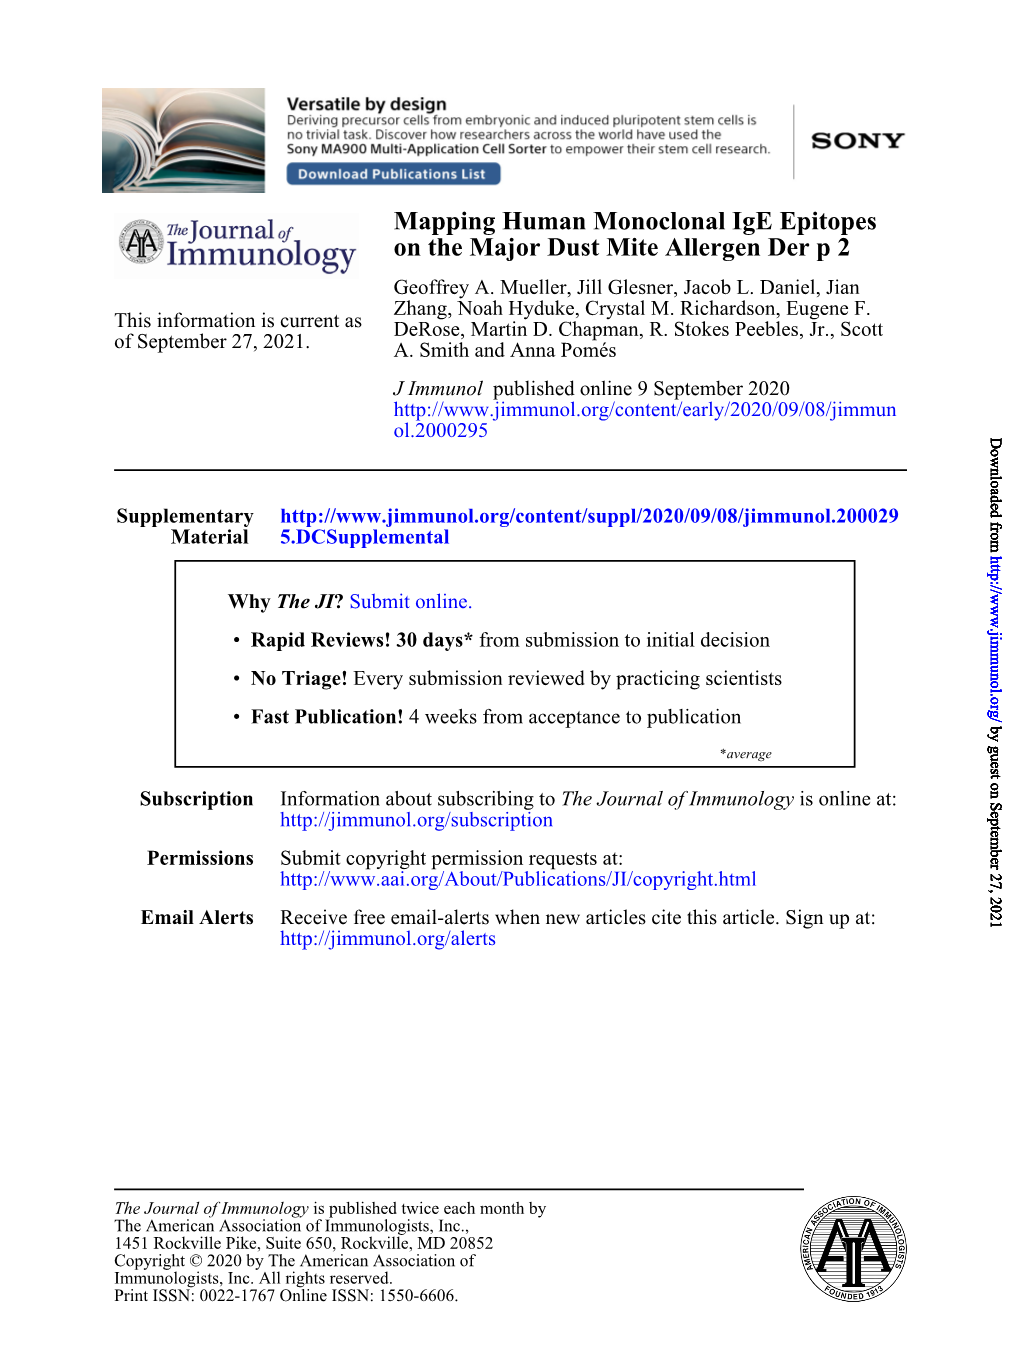 Mapping Human Monoclonal Ige Epitopes on the Major Dust Mite Allergen Der P 2 Geoffrey A